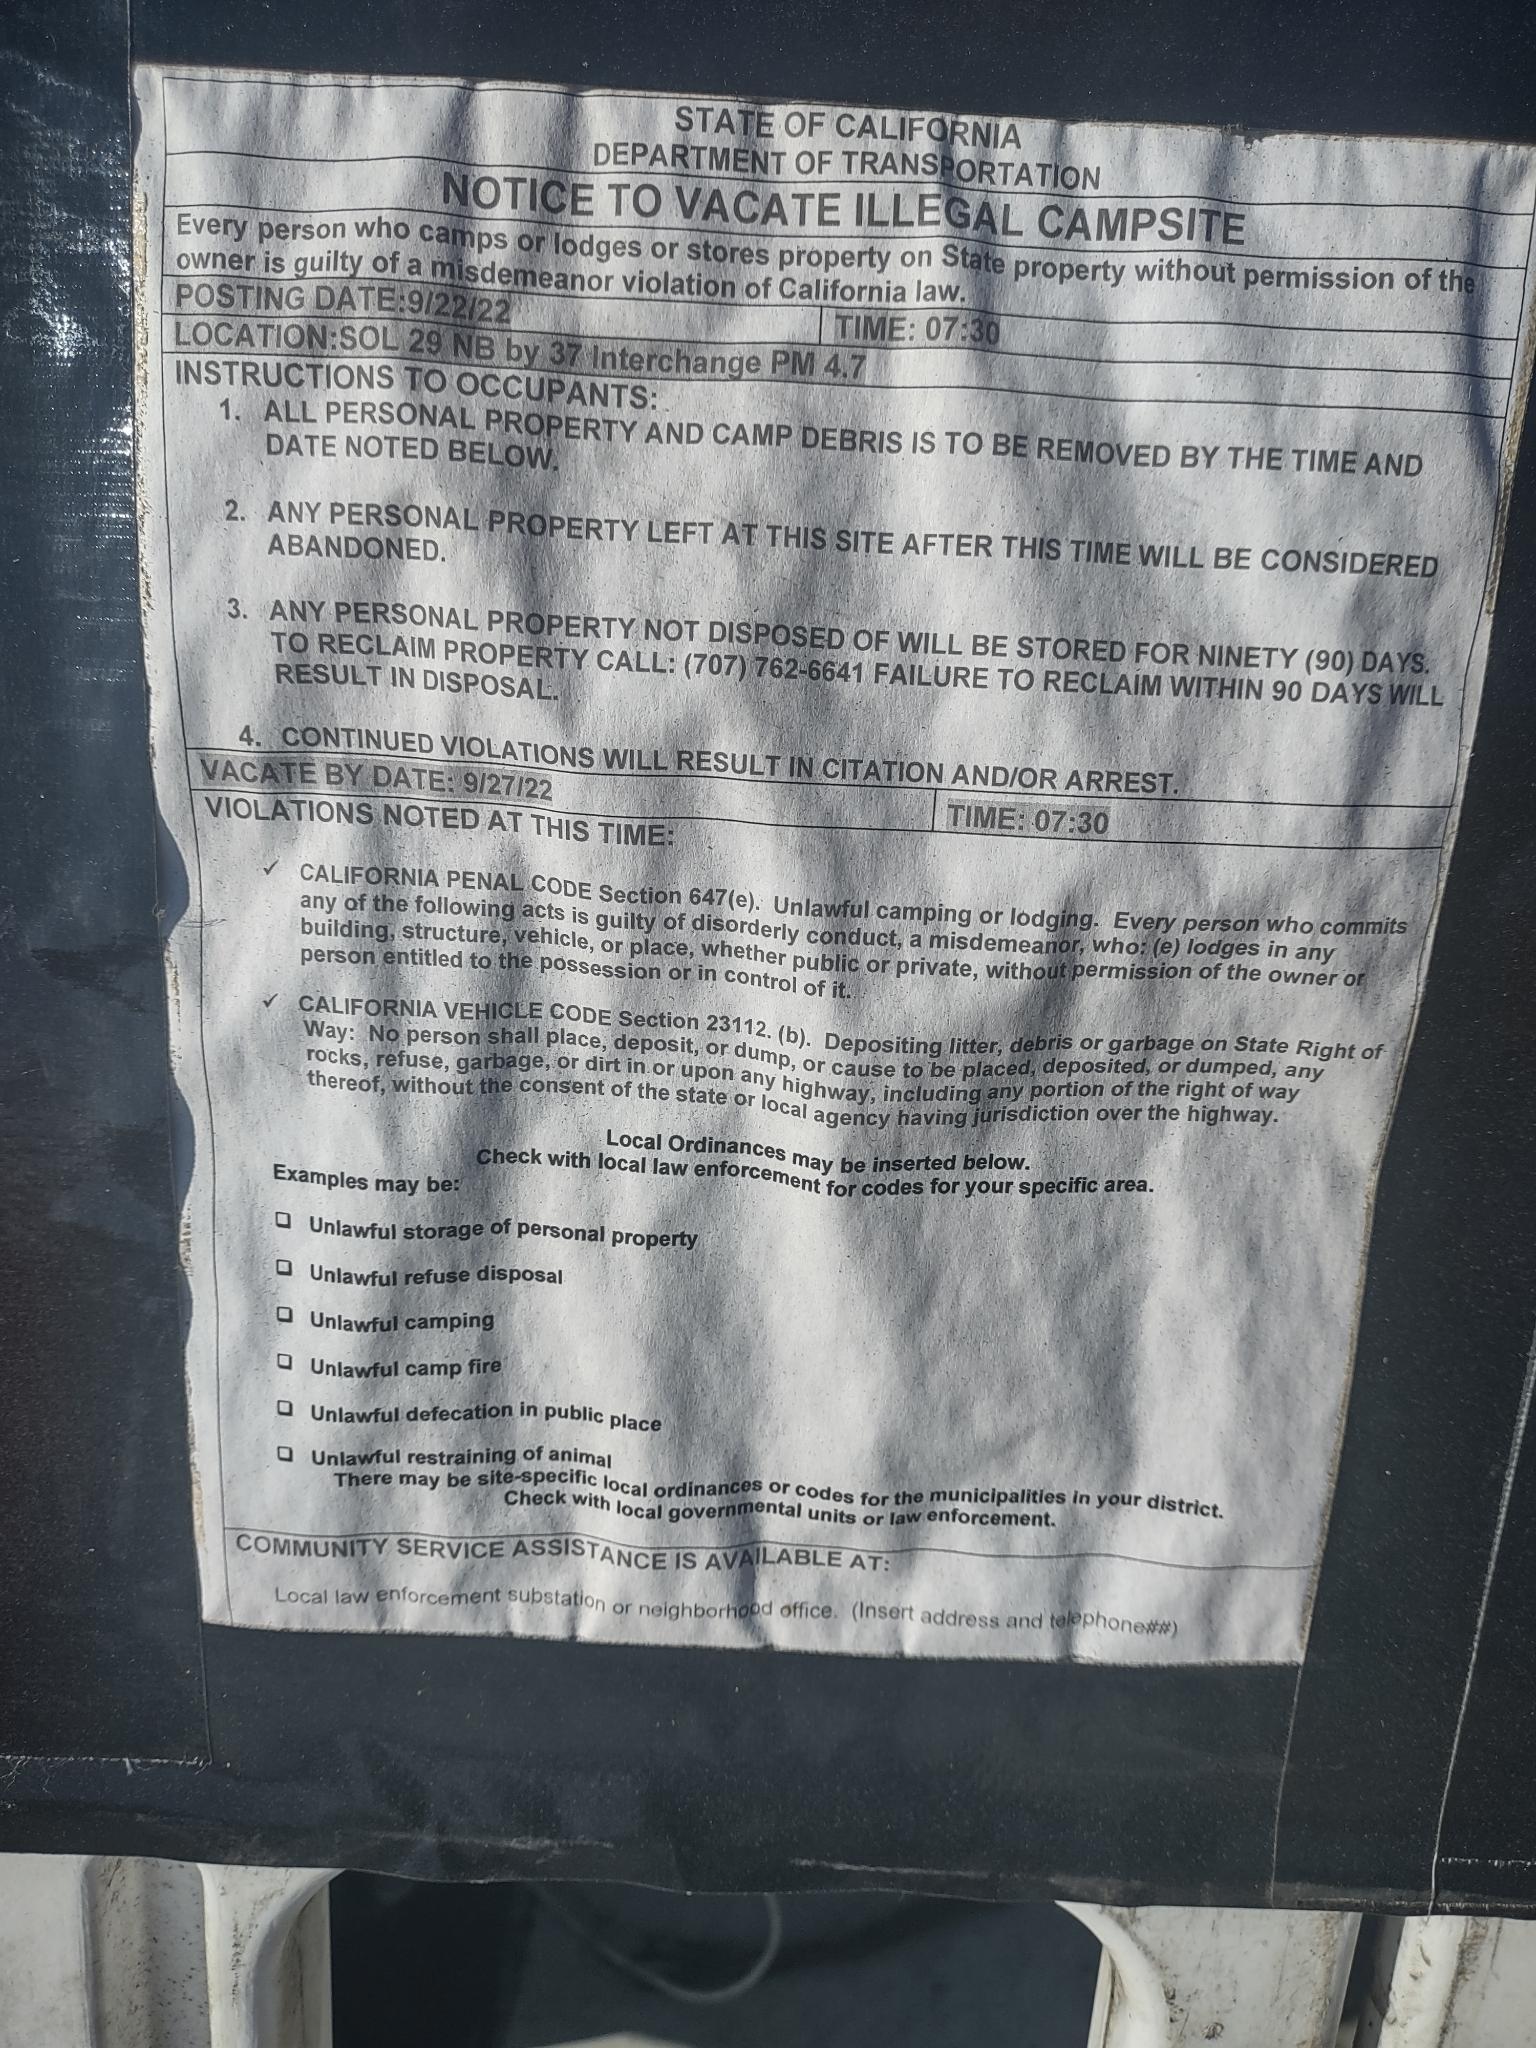 A notice of illegal campsite posted at the interchange of Highways 29 and 27.